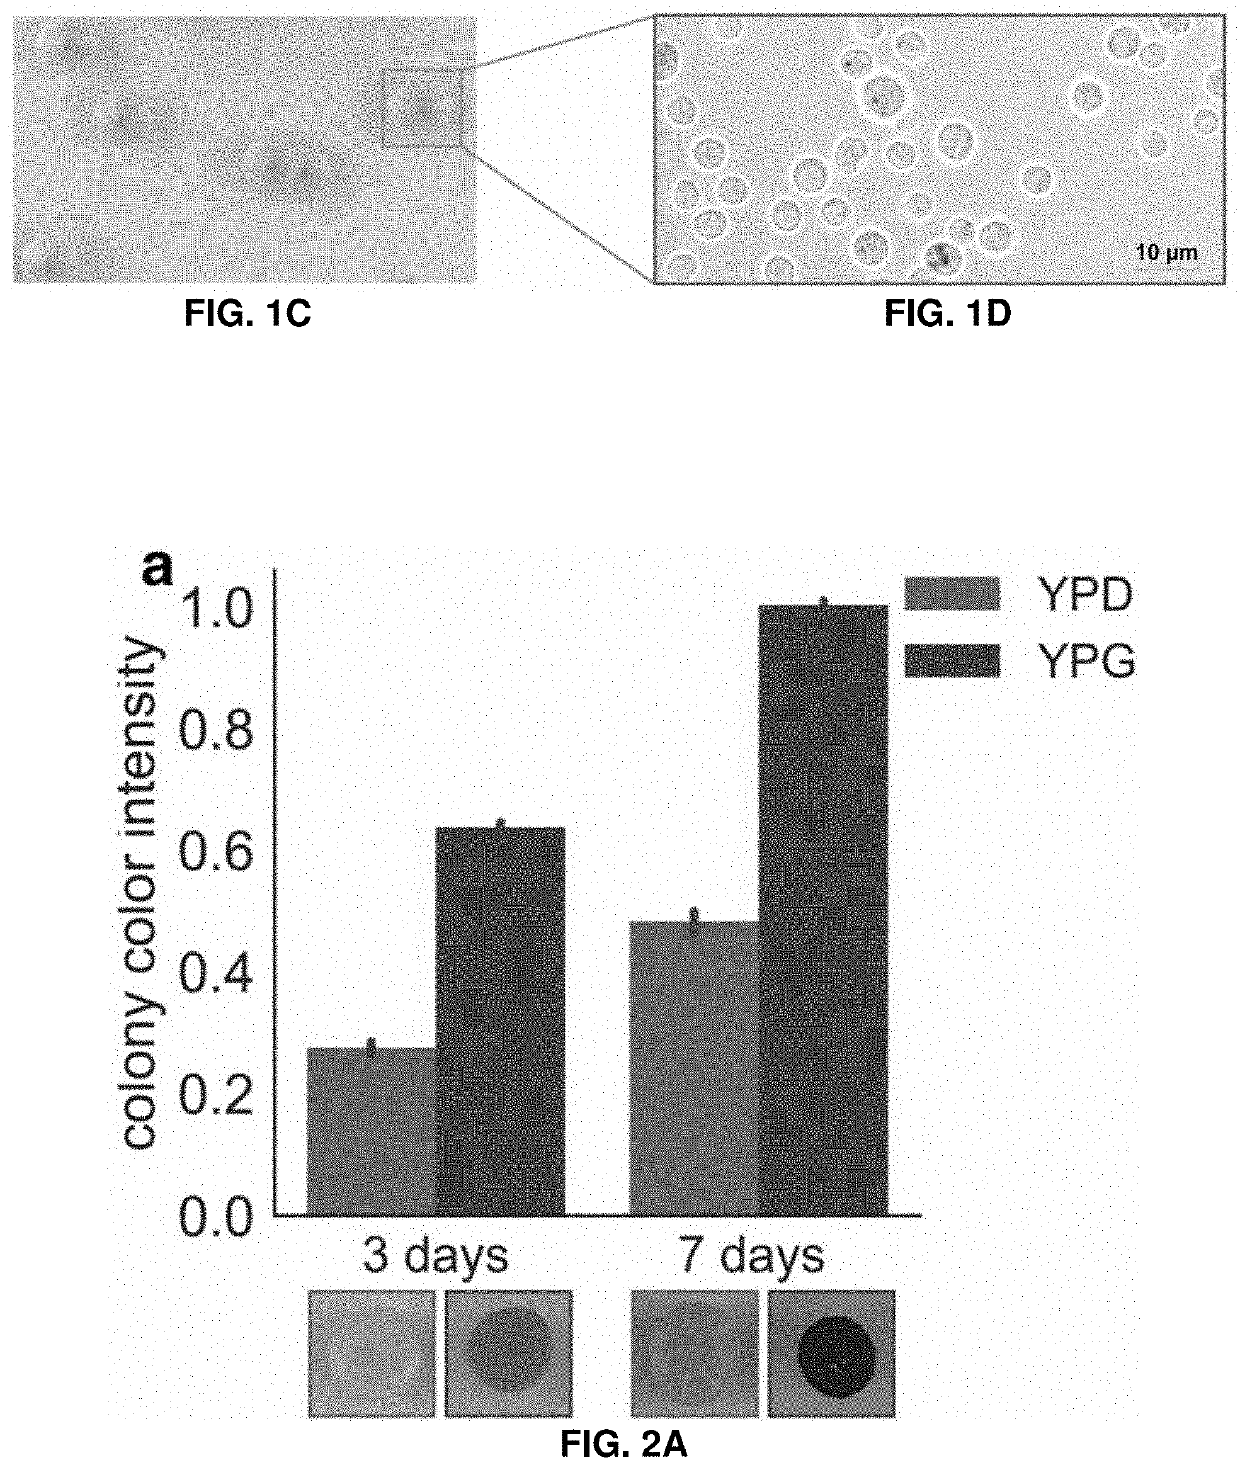 Host yeast cells and methods useful for producing indigoidine